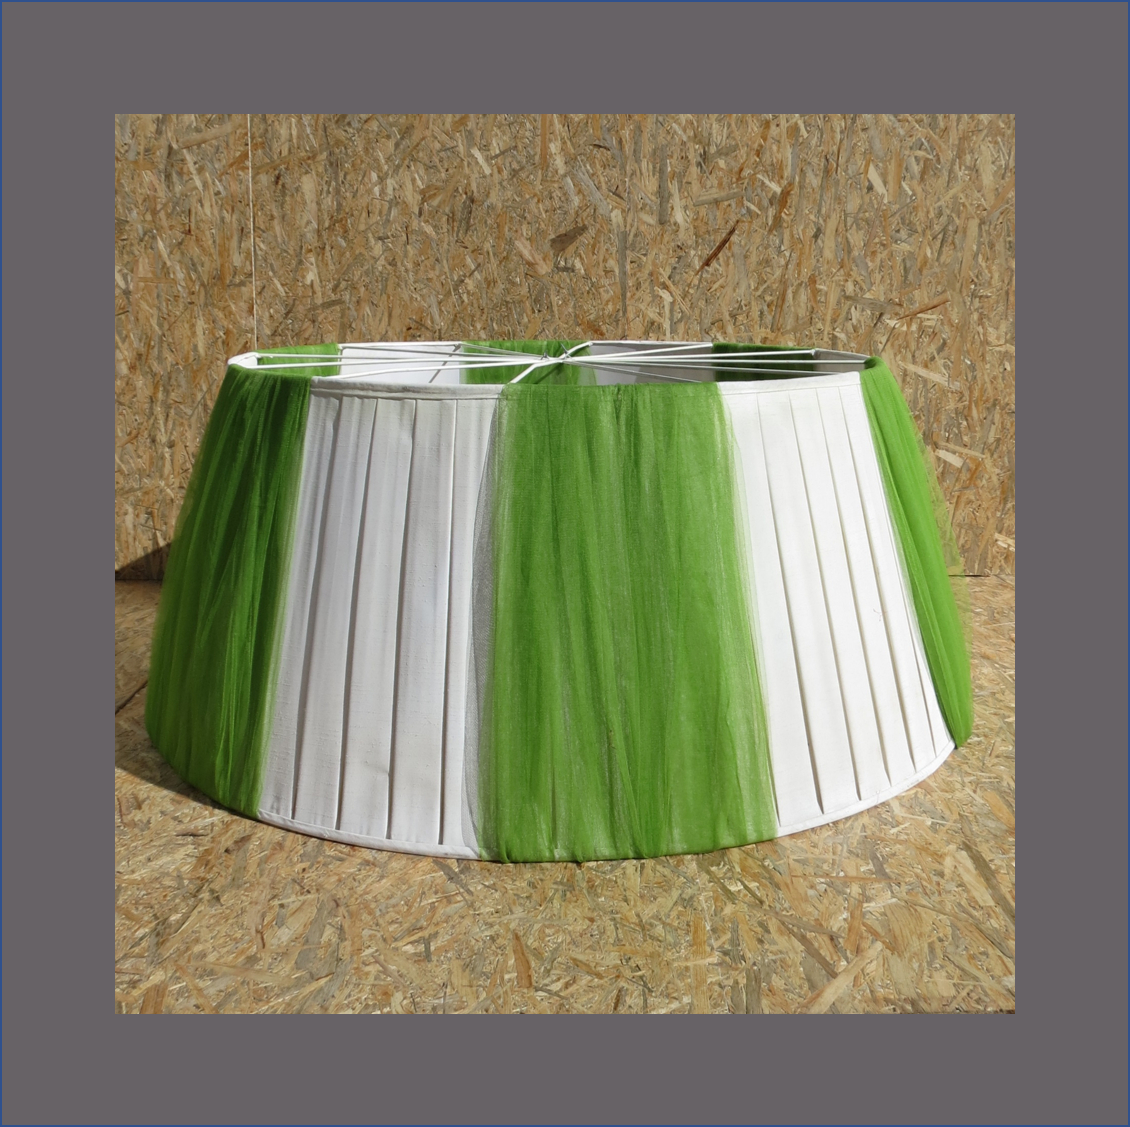 over-size-lamp-shade